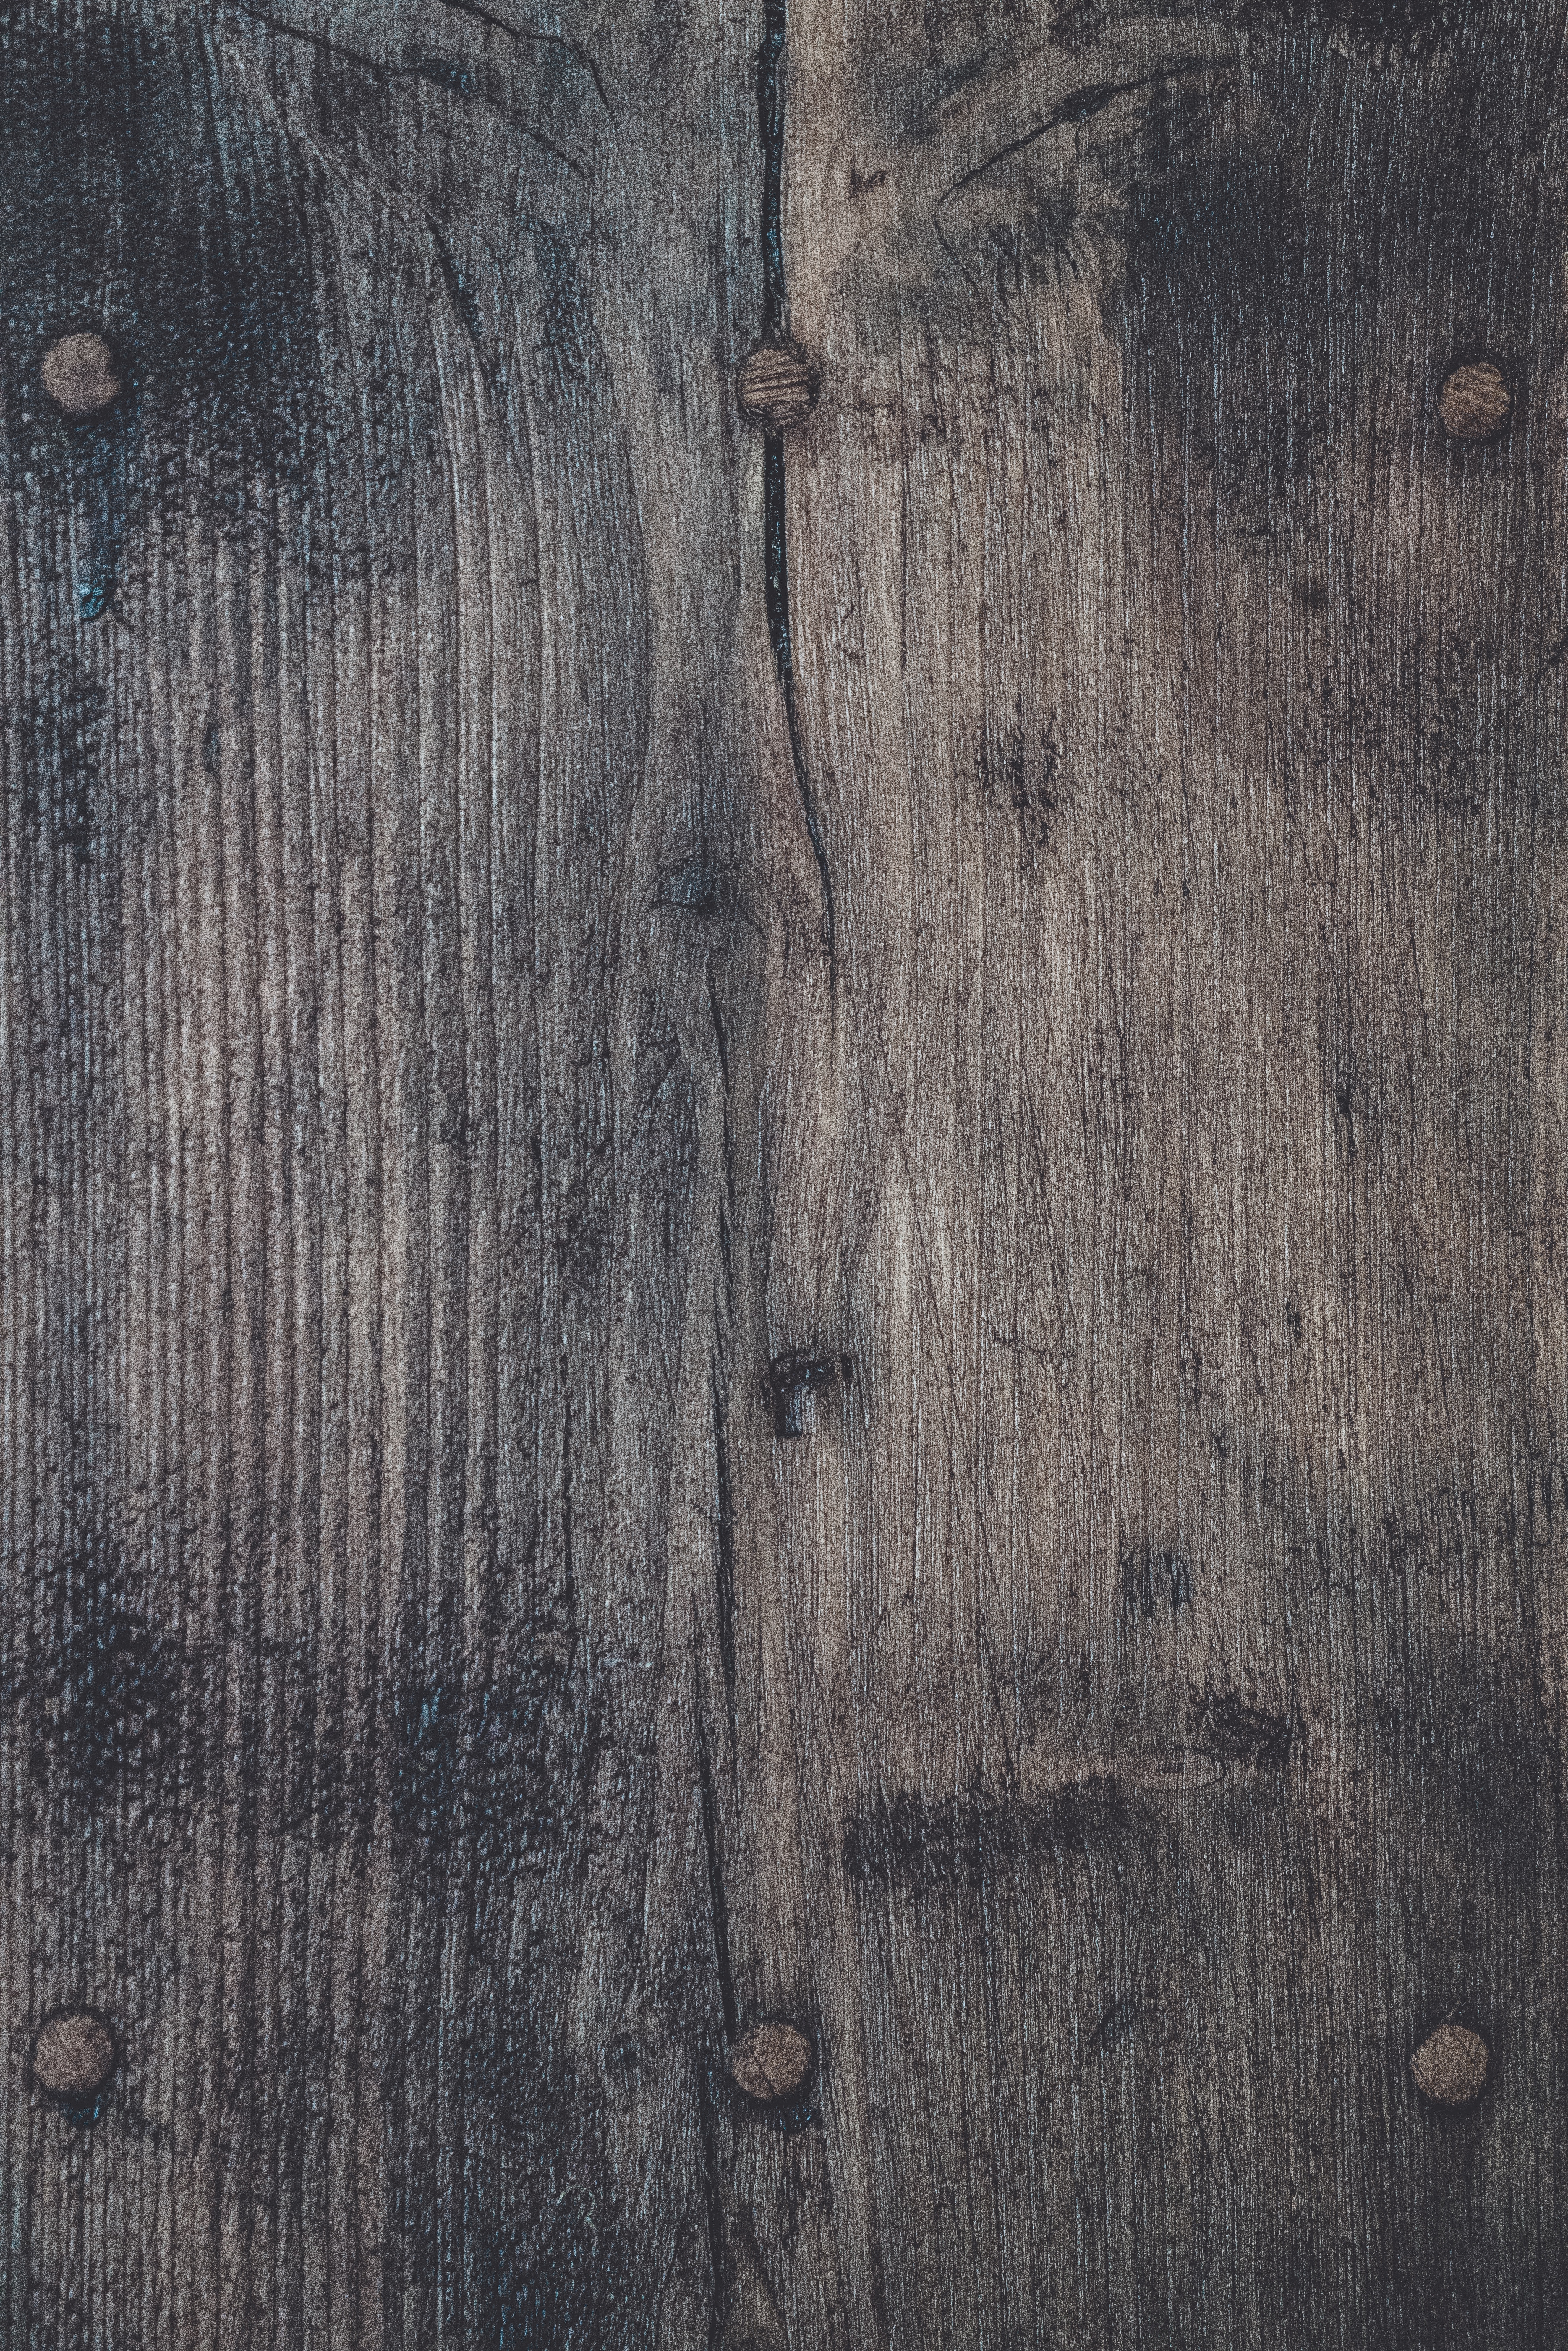 texture, ribbed, textures, surface, wood, wooden